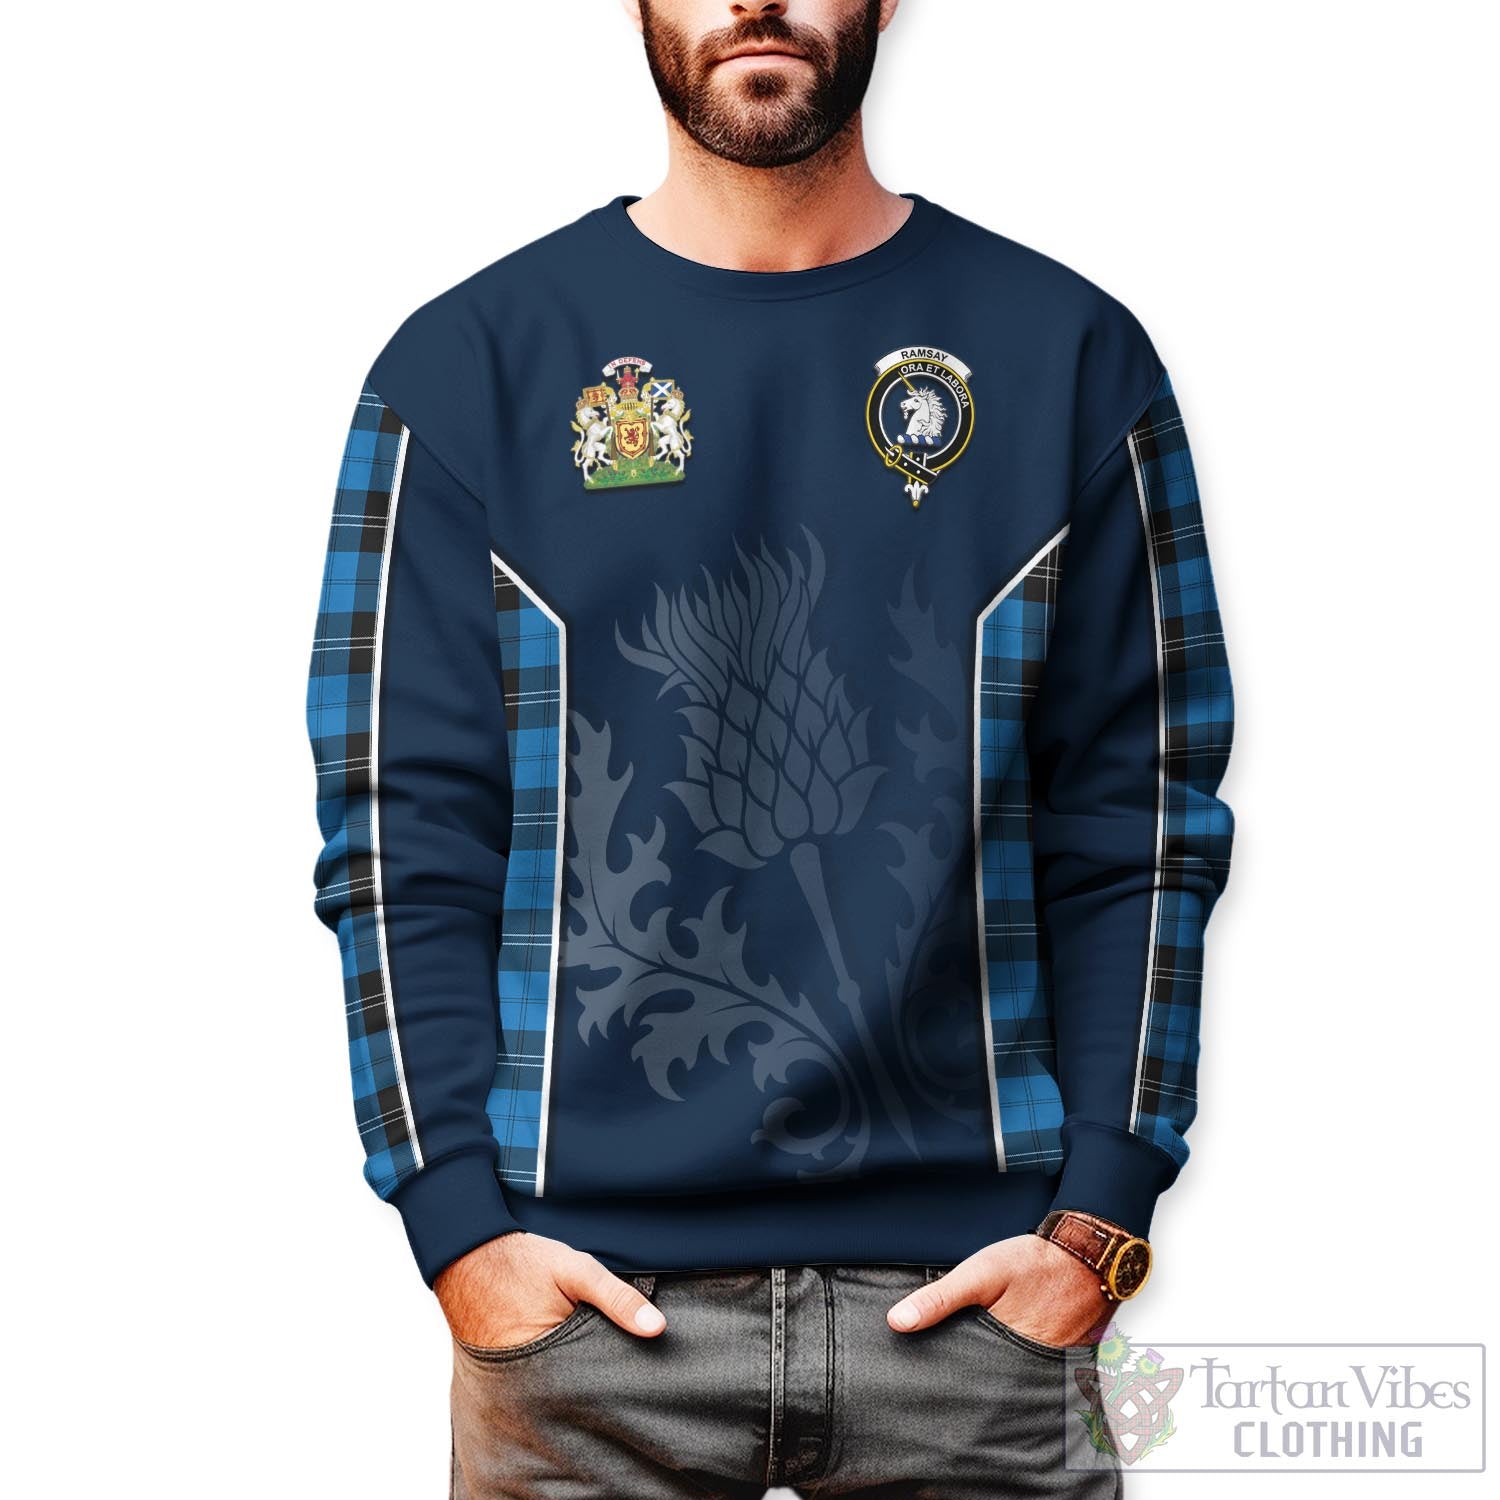 Tartan Vibes Clothing Ramsay Blue Ancient Tartan Sweatshirt with Family Crest and Scottish Thistle Vibes Sport Style